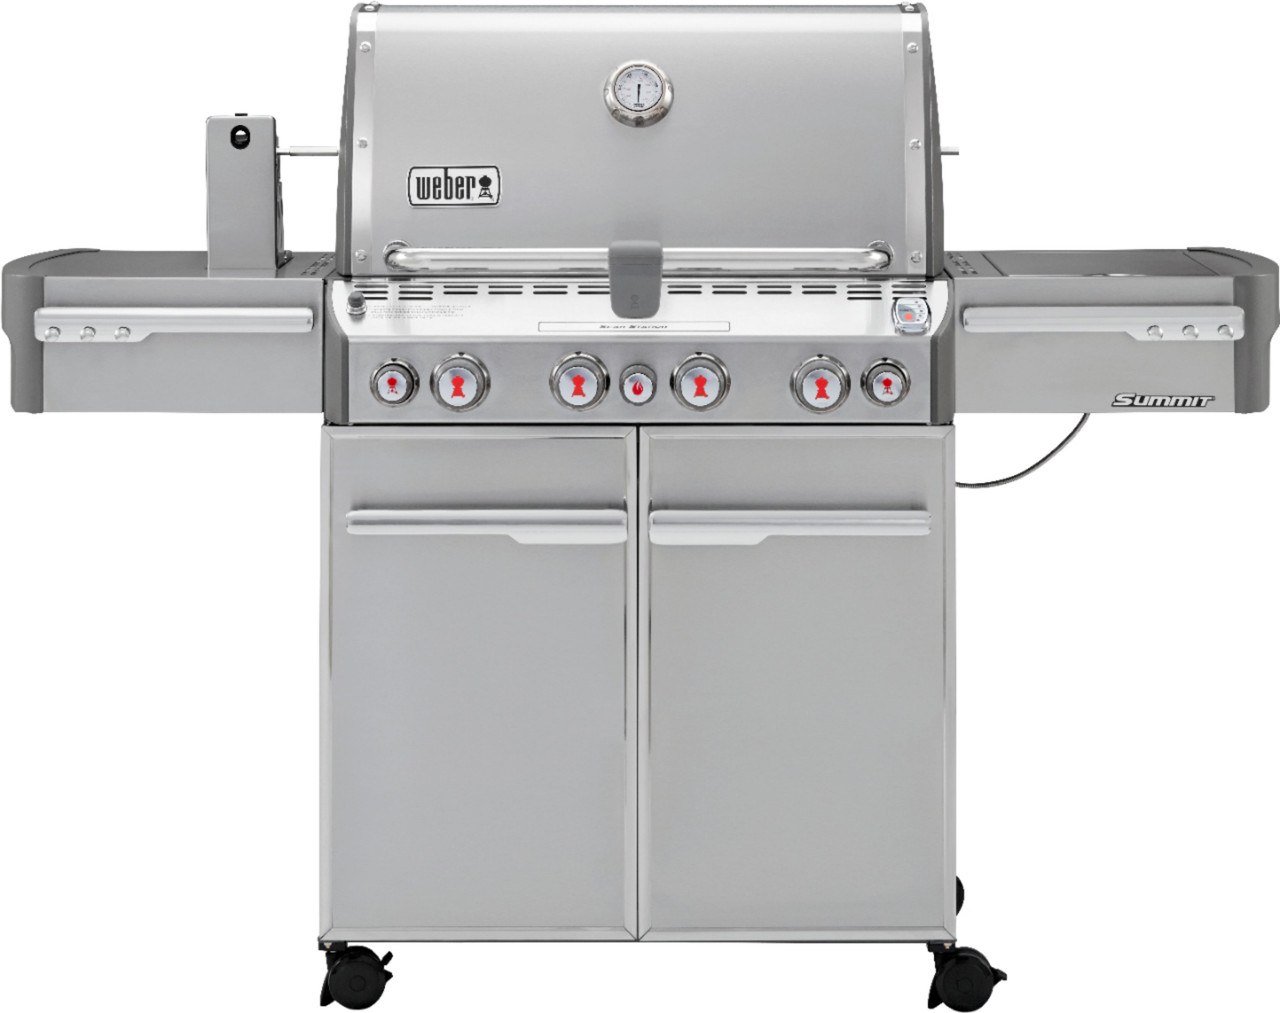 Weber - Summit S-470 4-Burner Propane Gas Grill in Stainless Steel with Built-In Thermometer and Rotisserie - Stainless Steel